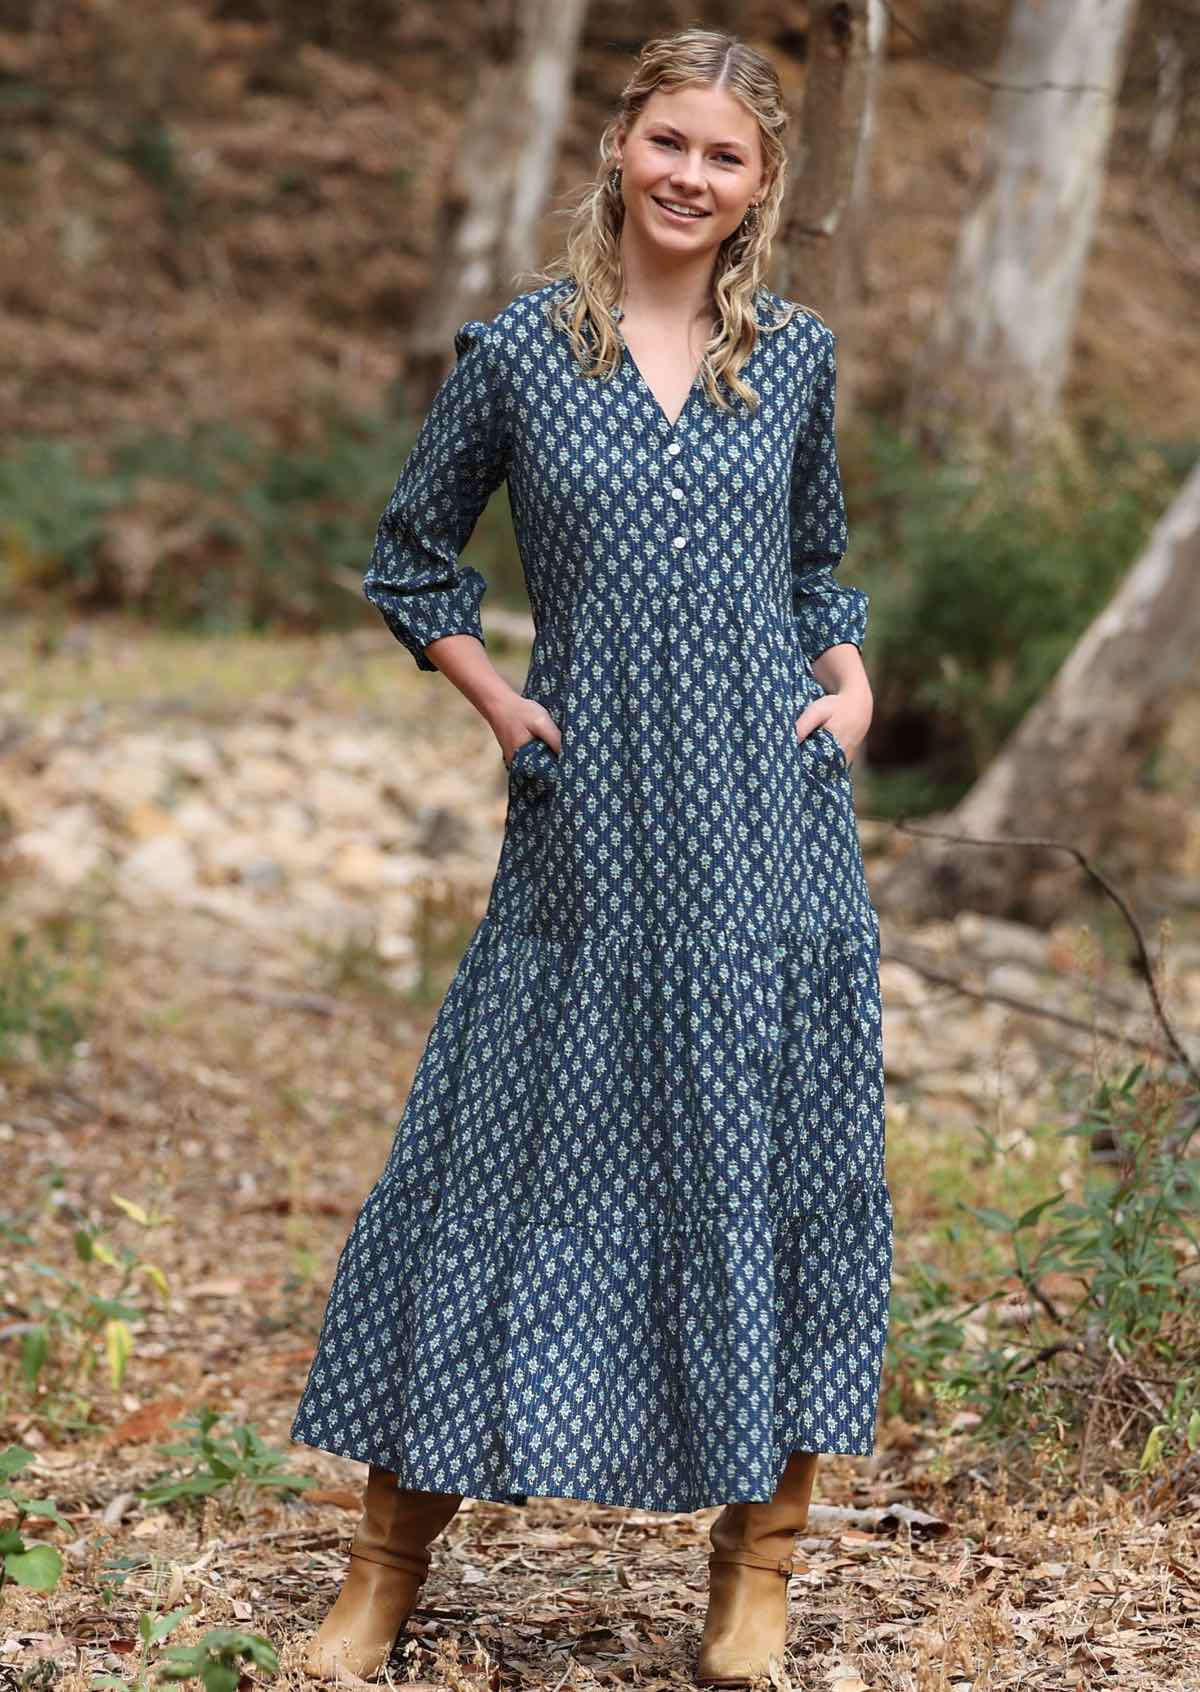 Cotton maxi dress with pockets and 3/4 sleeves loos great belted